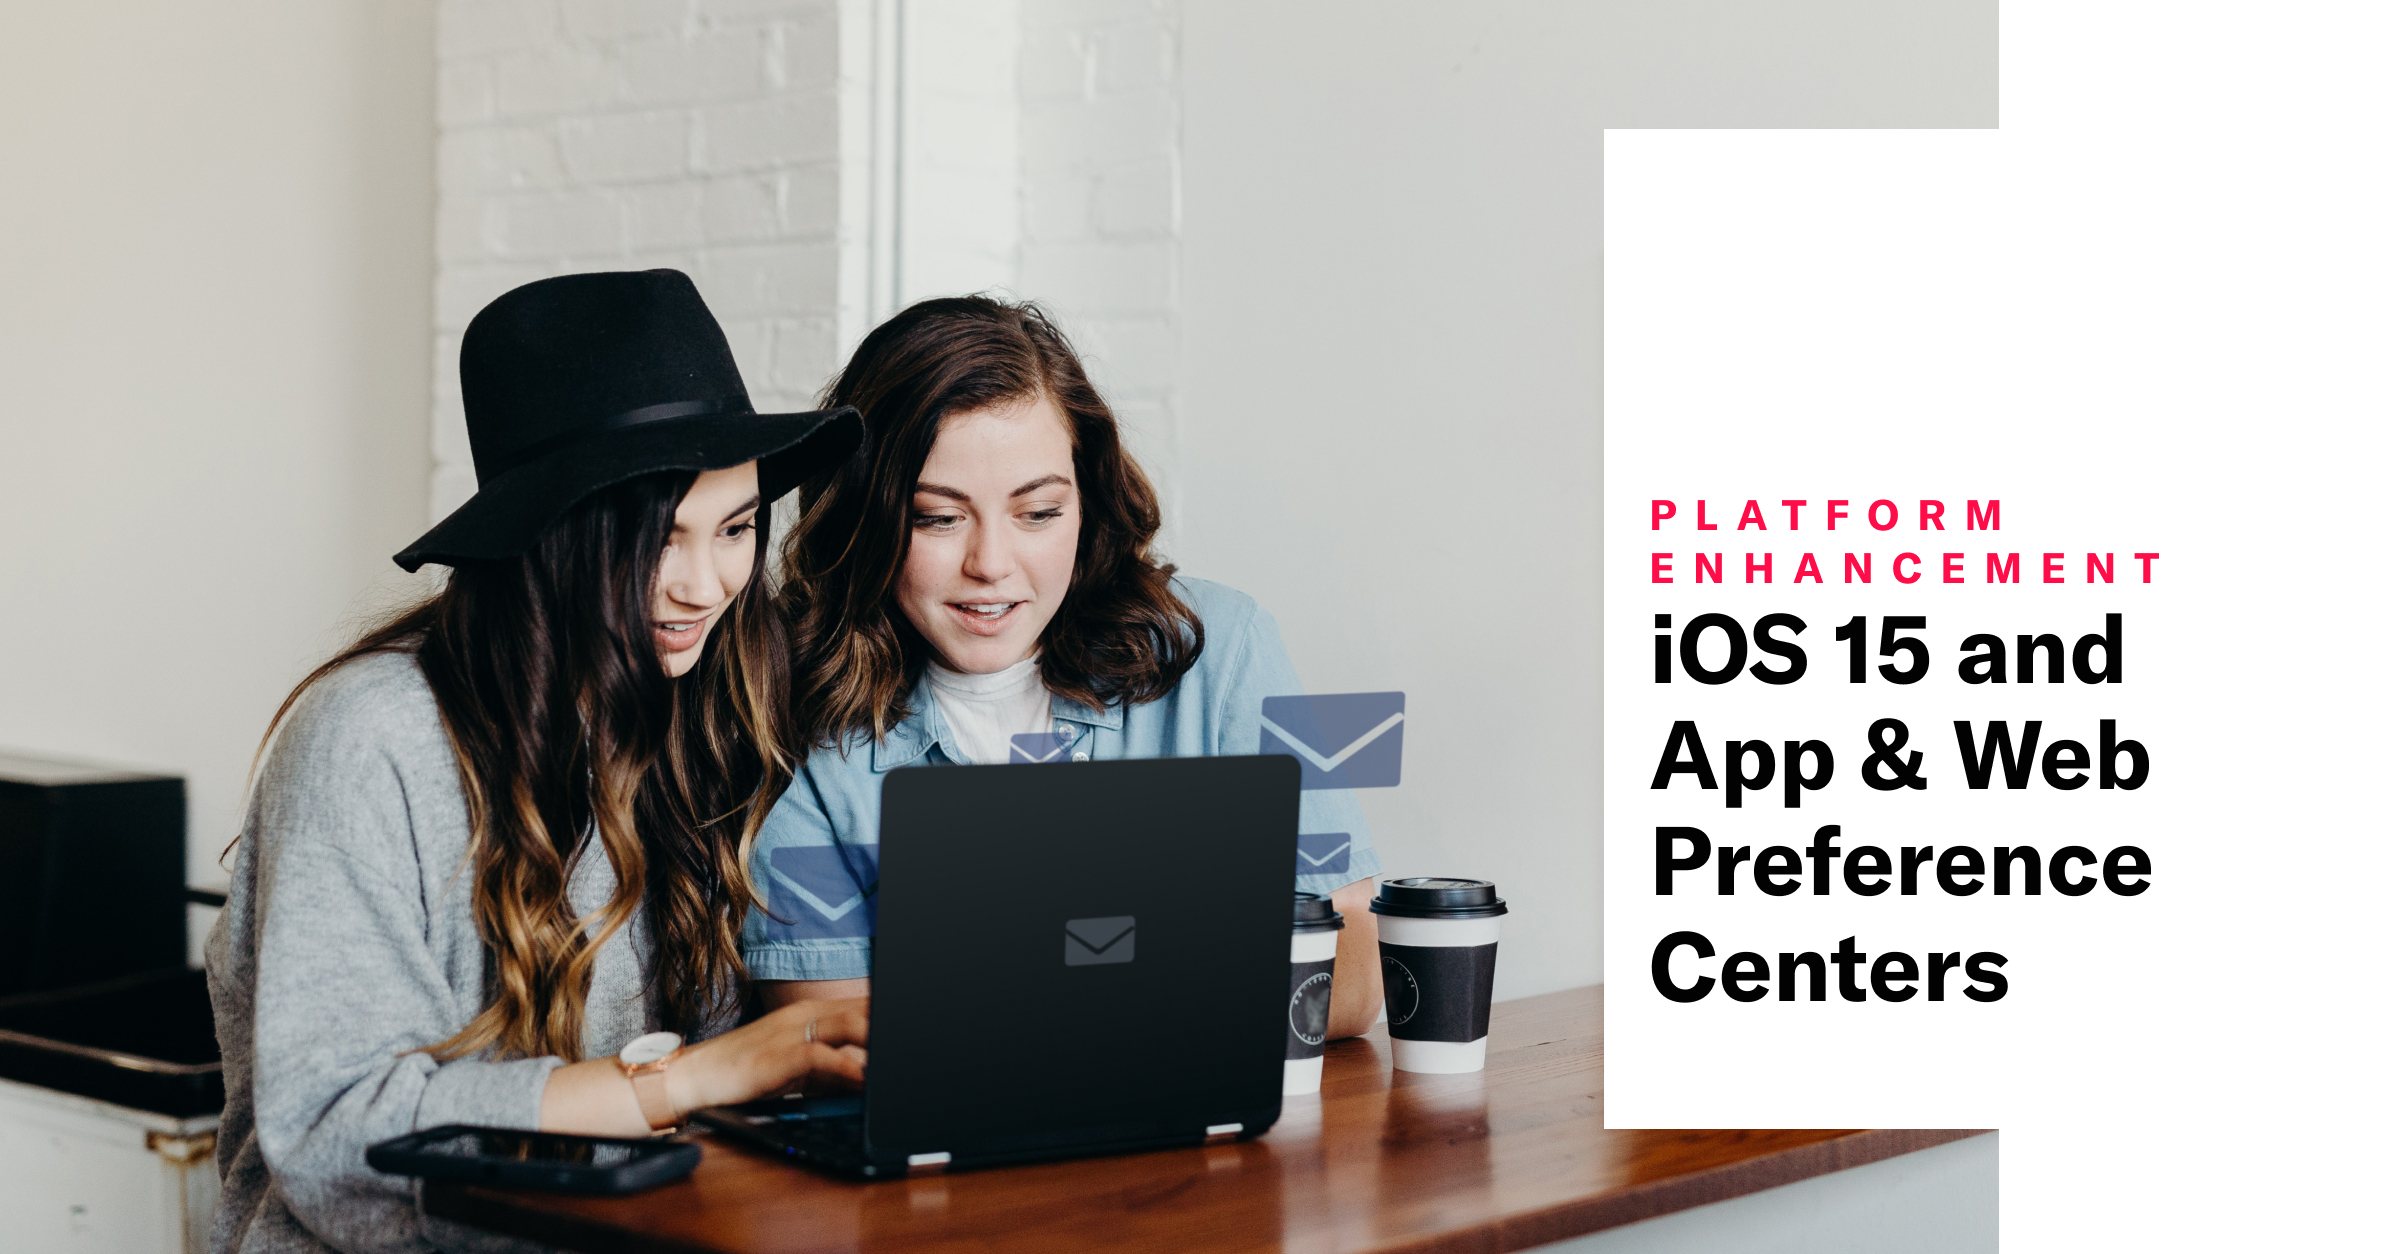 iOS 15 and App & Web Preference Centers